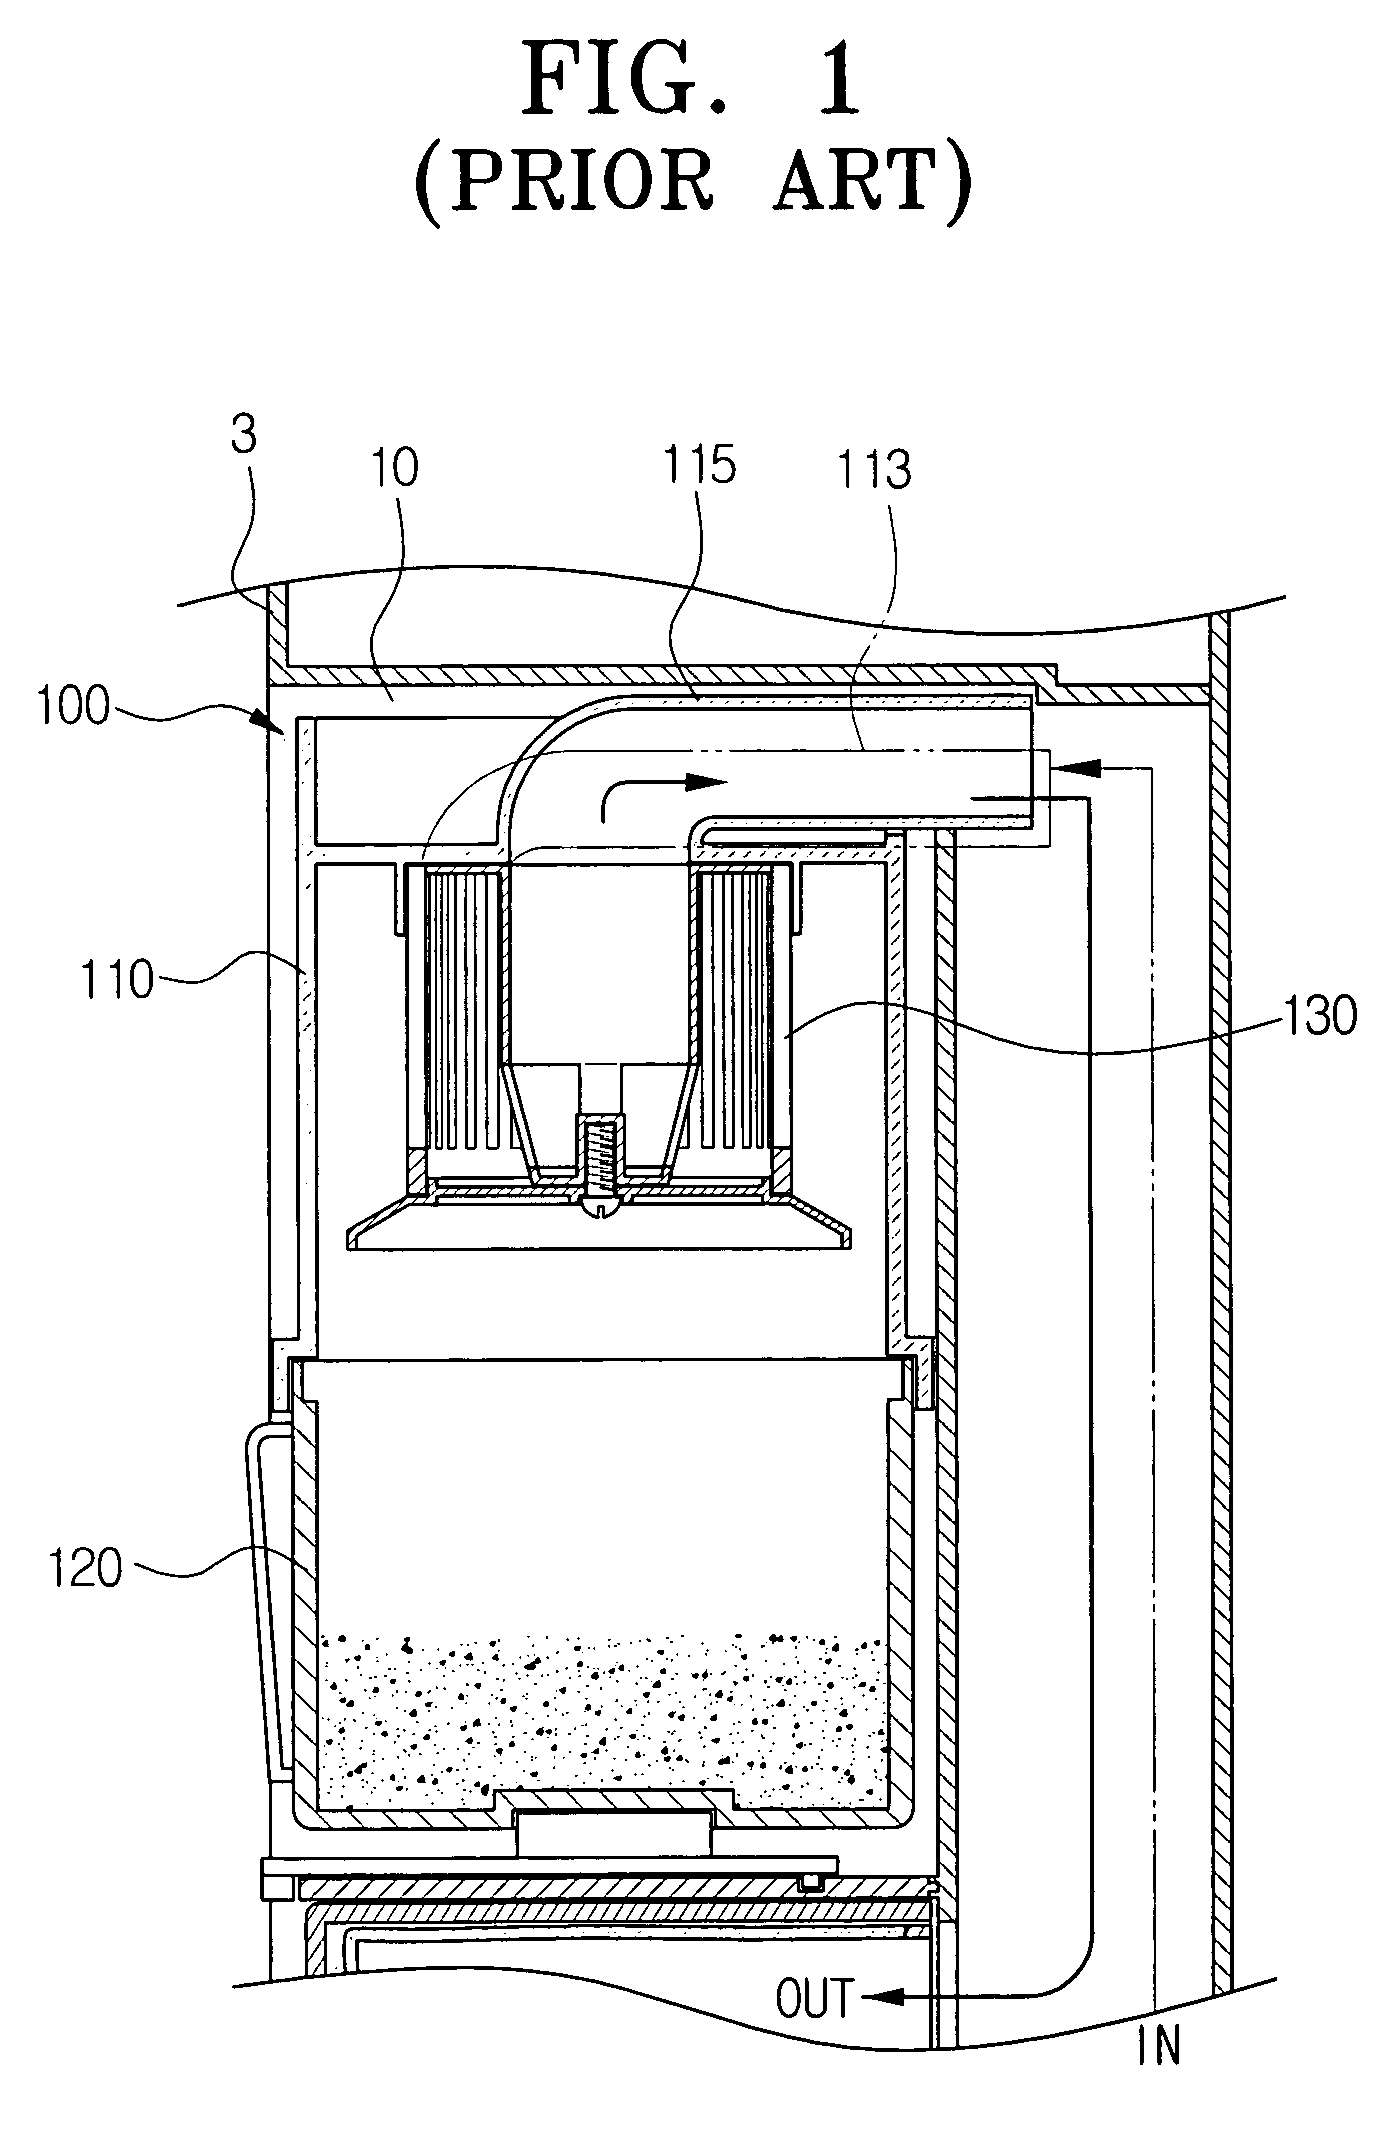 Cyclone dust collecting apparatus of vacuum cleaner